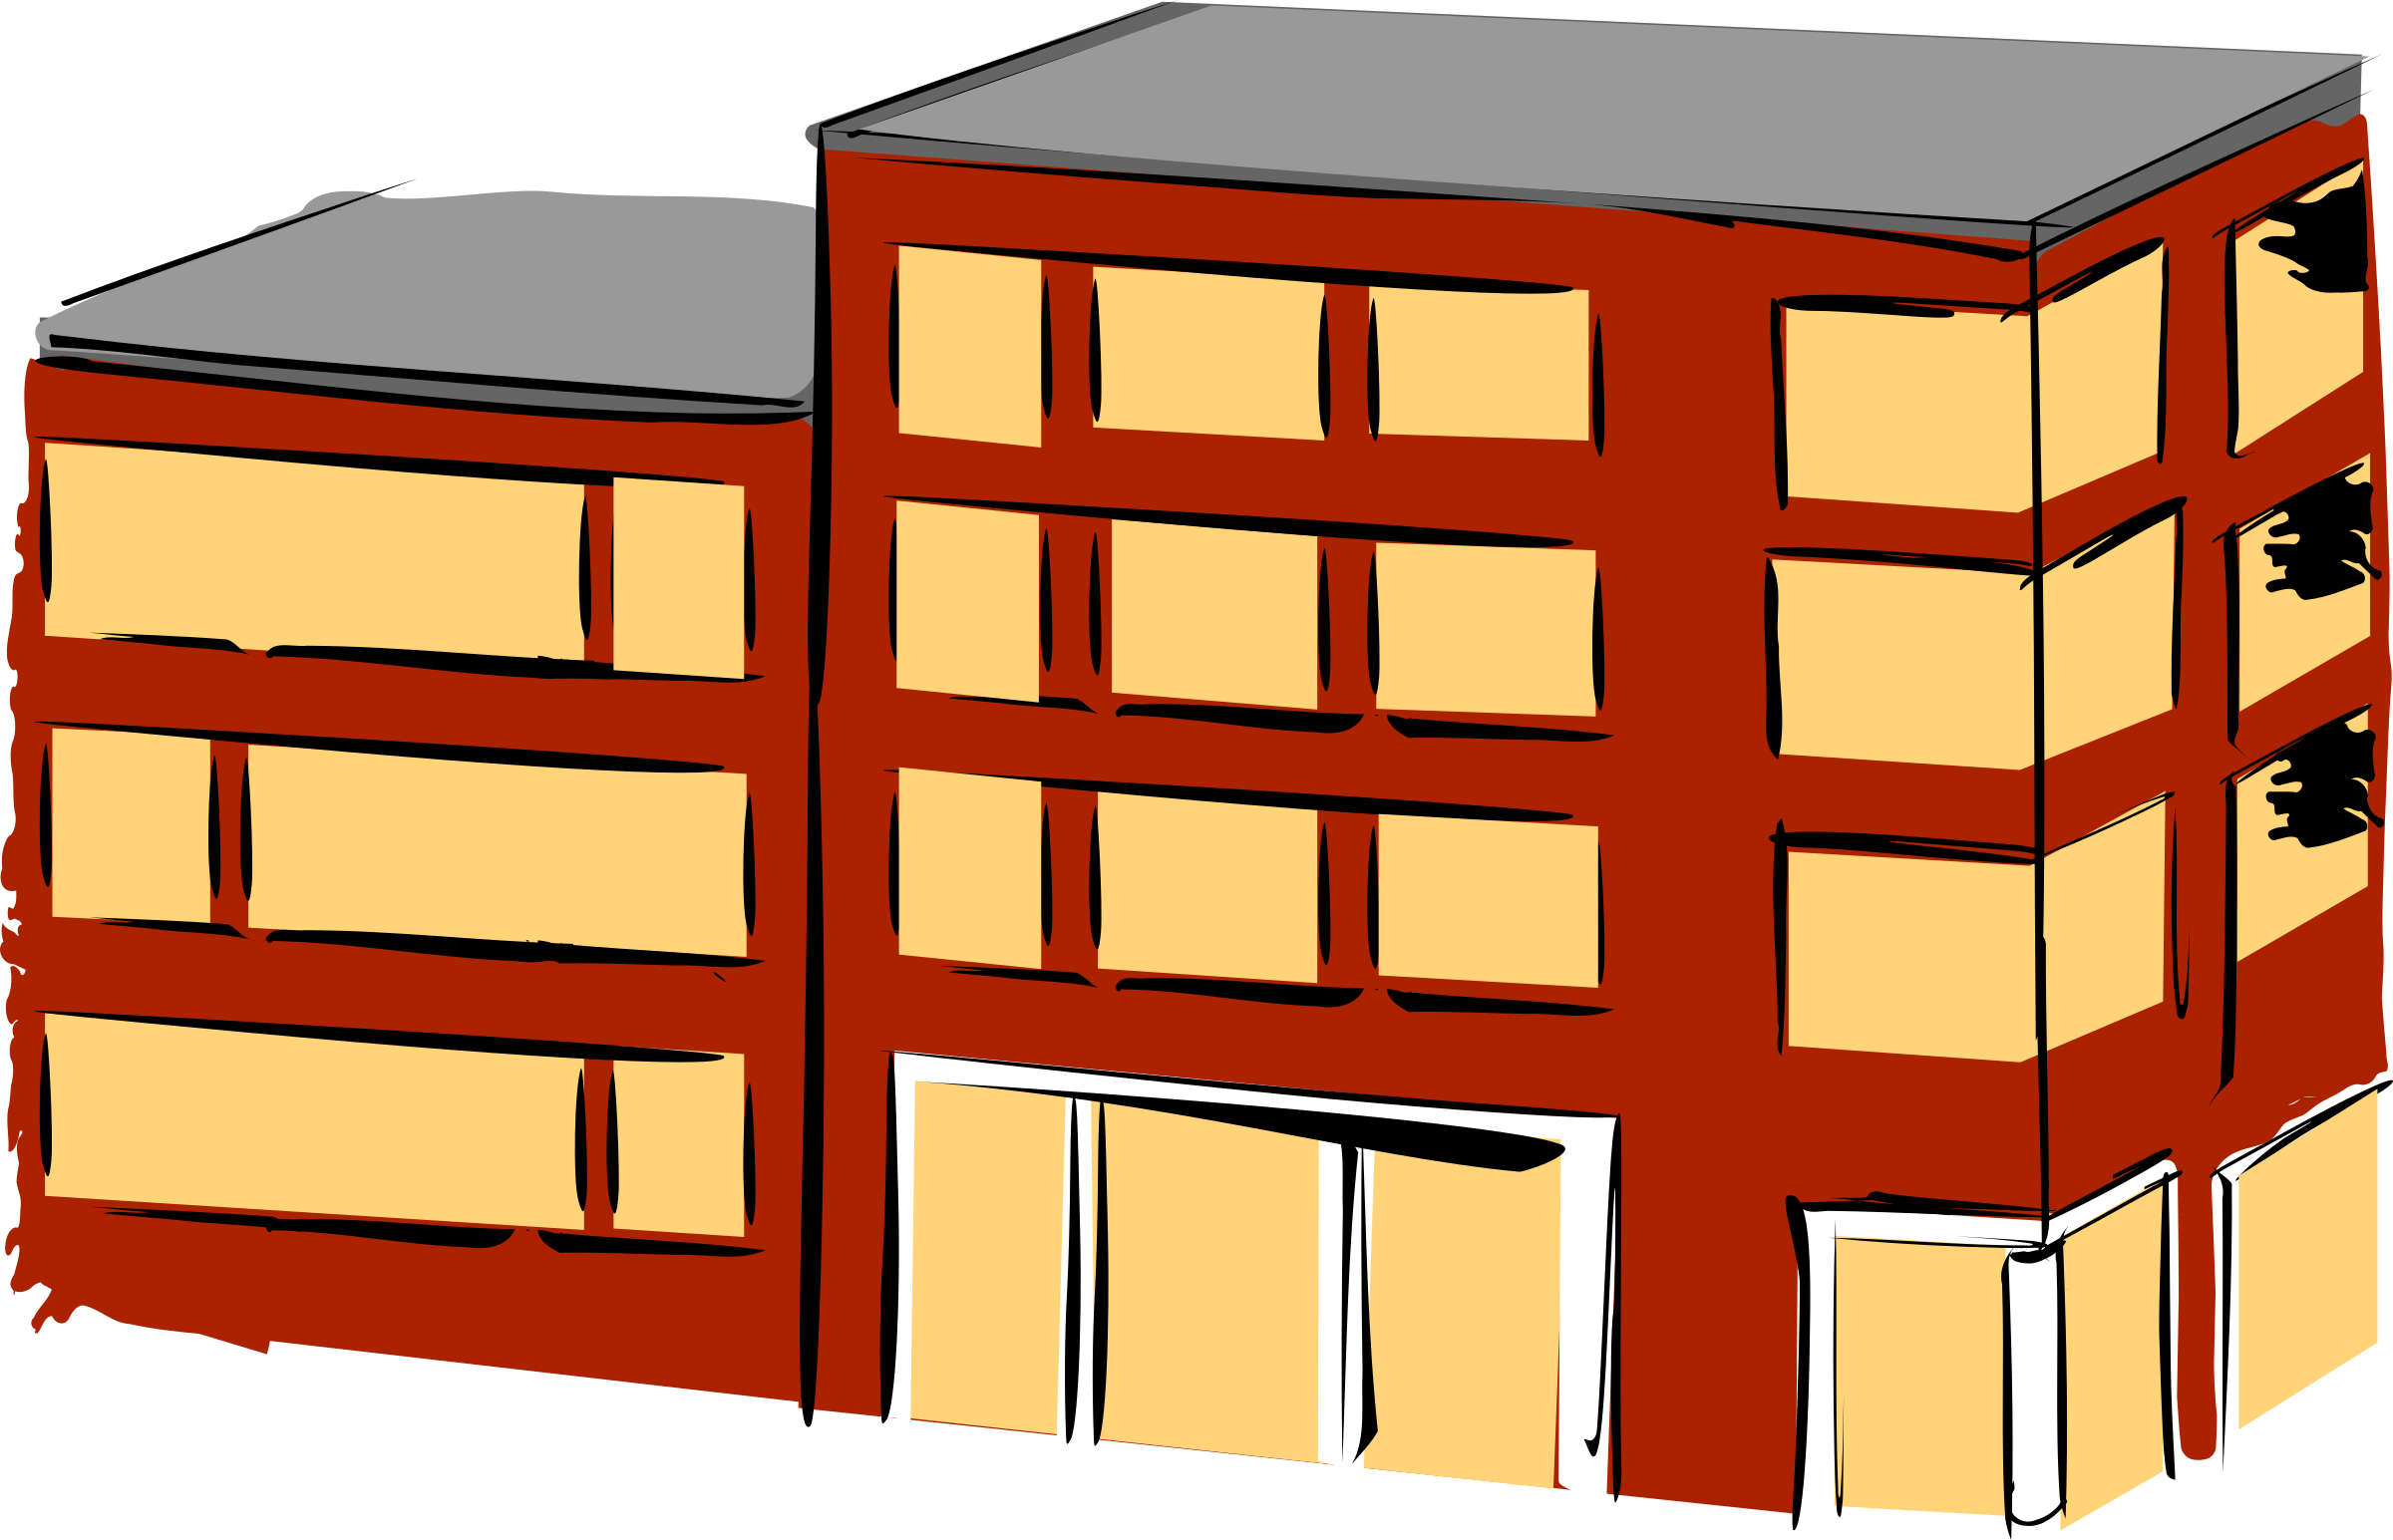 Eight Story Apartment Buildin